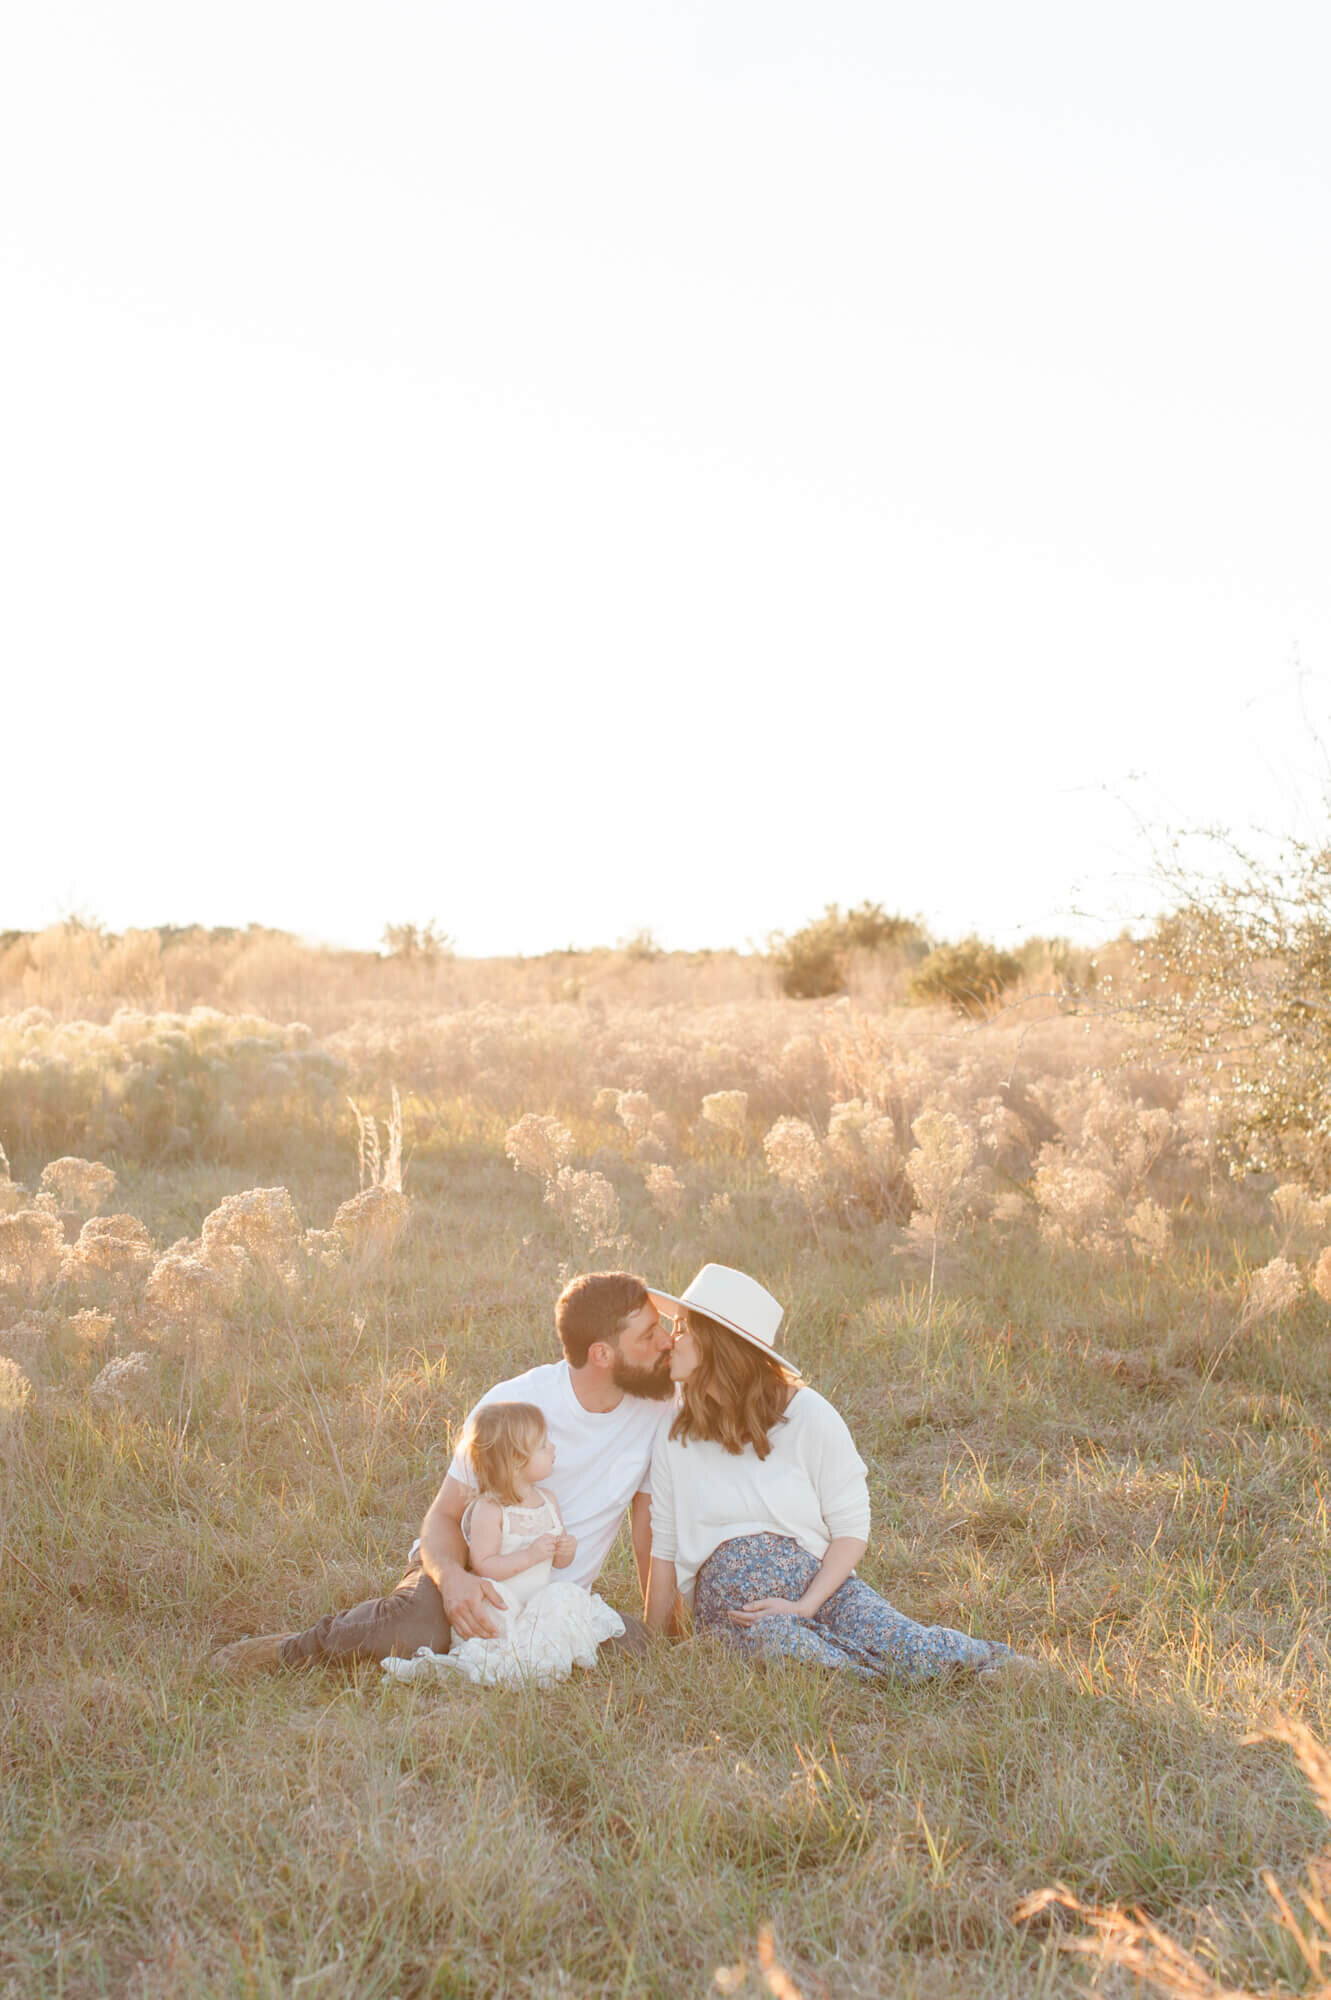 Pregnant family of 3 sit in a field of tall grass with mom and dad kissing